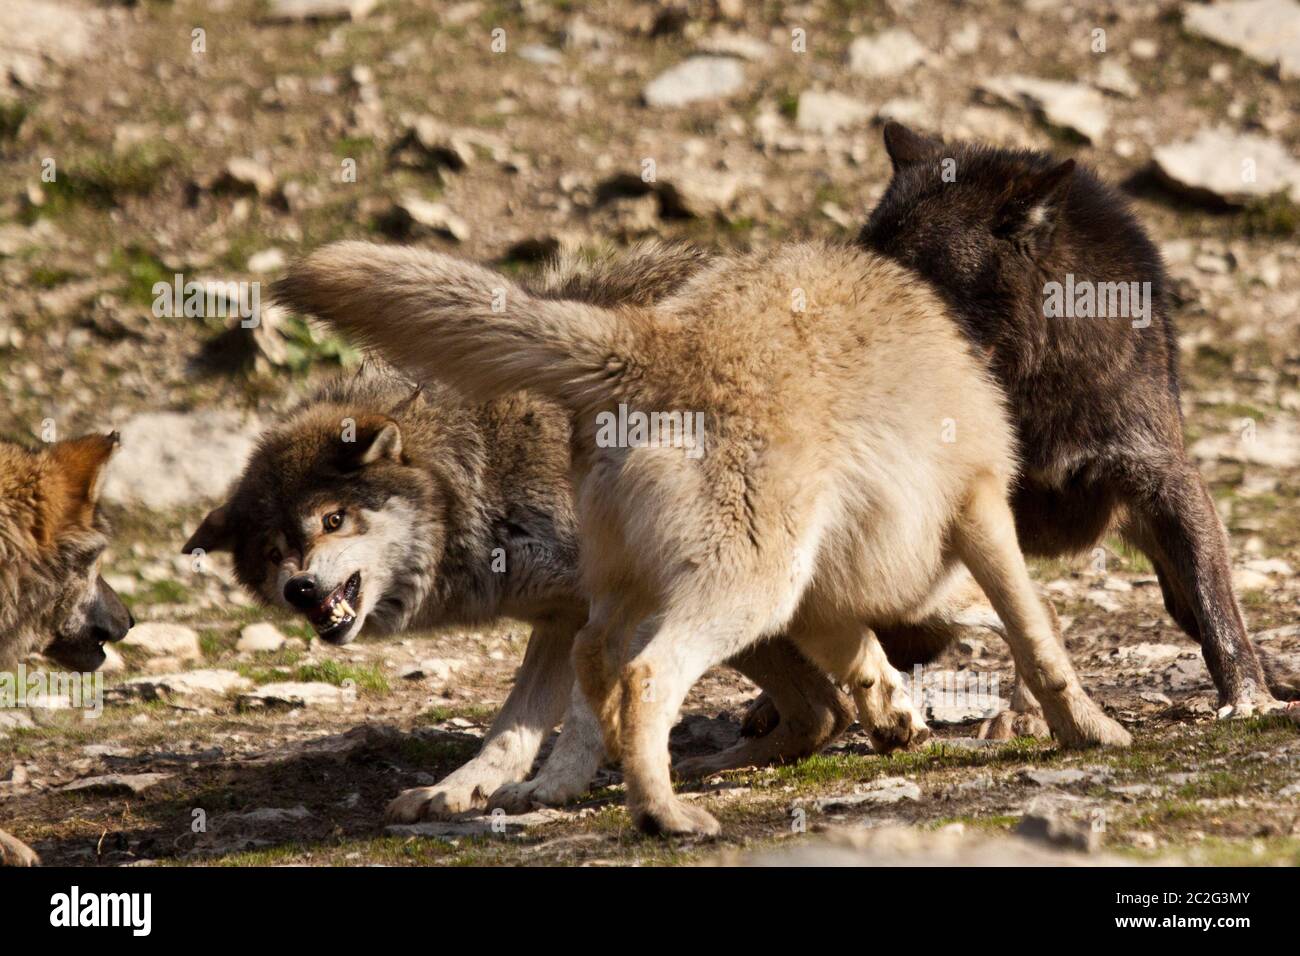 Eastern Wolf or american grey wolf (Canis lupus lycaon) Stock Photo